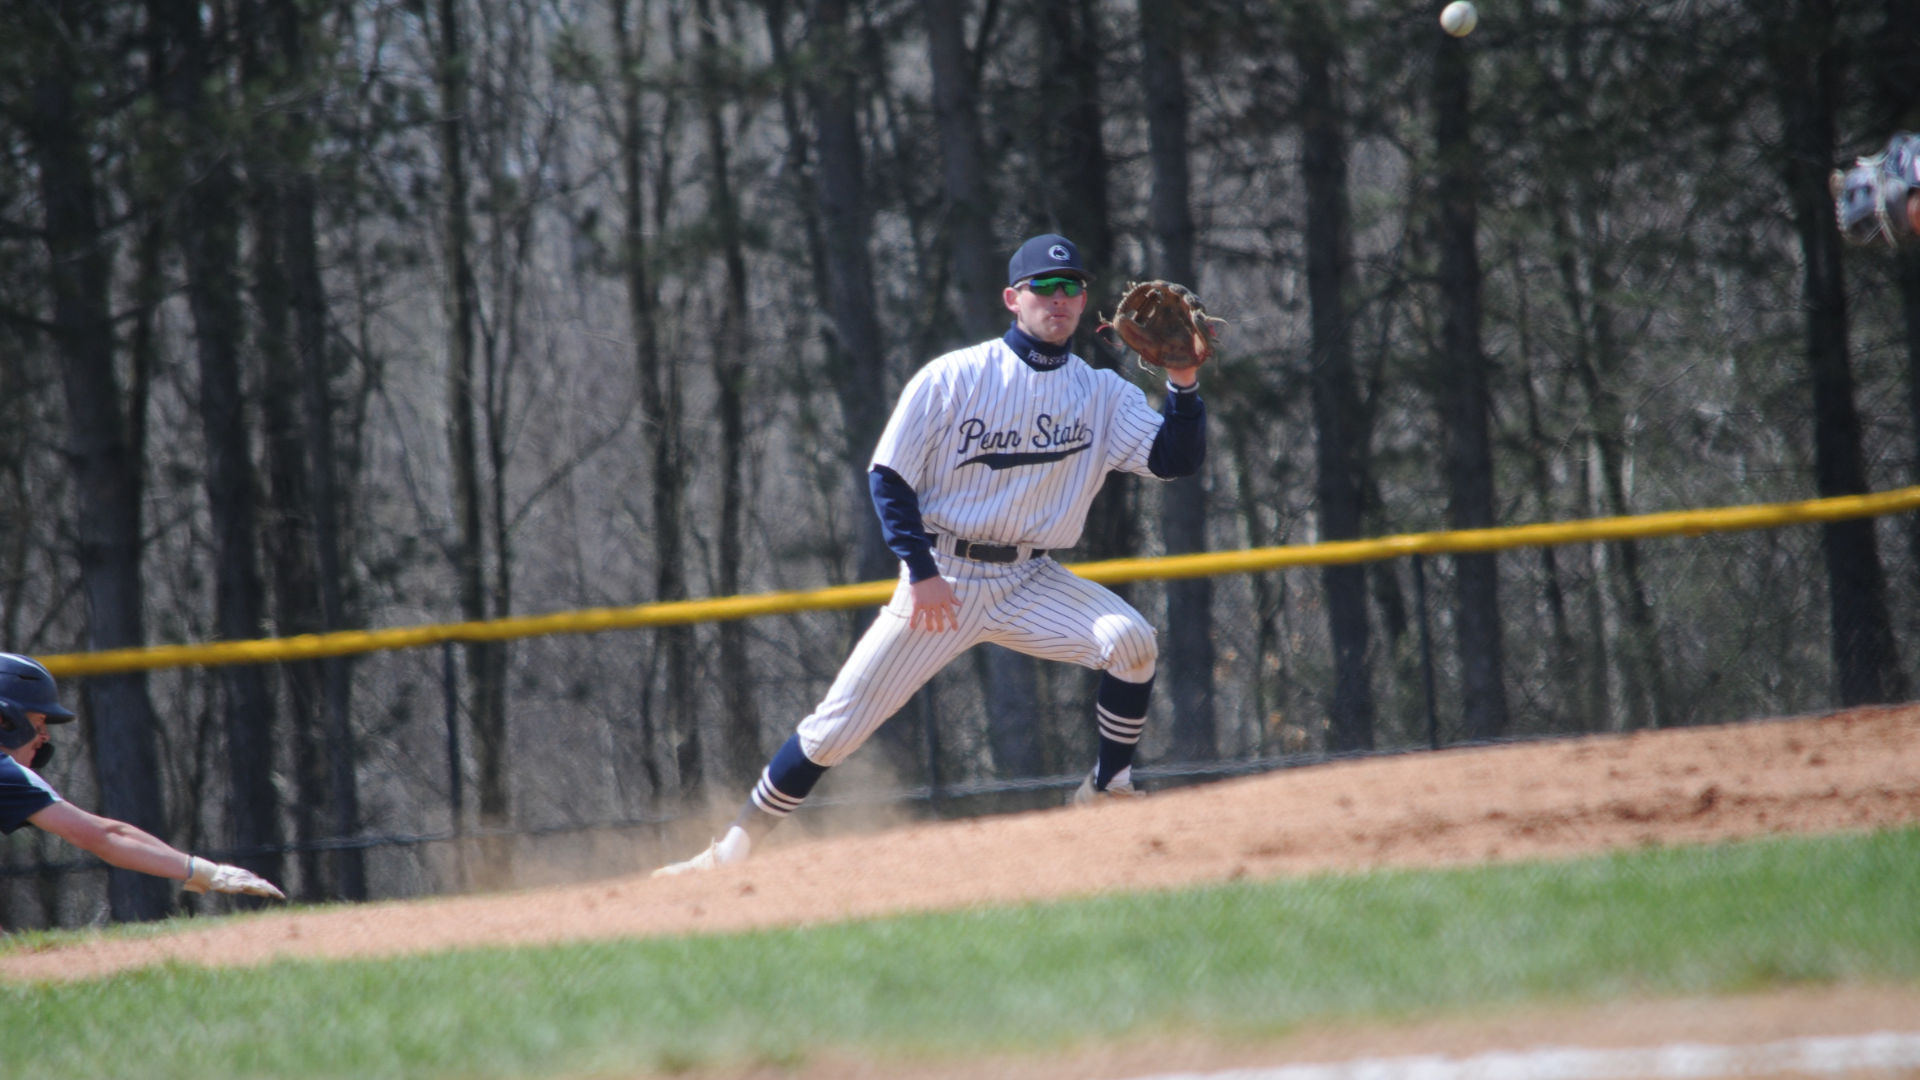 Mike DeWolfe makes a play at 2nd during Saturday's game against Penn State York.